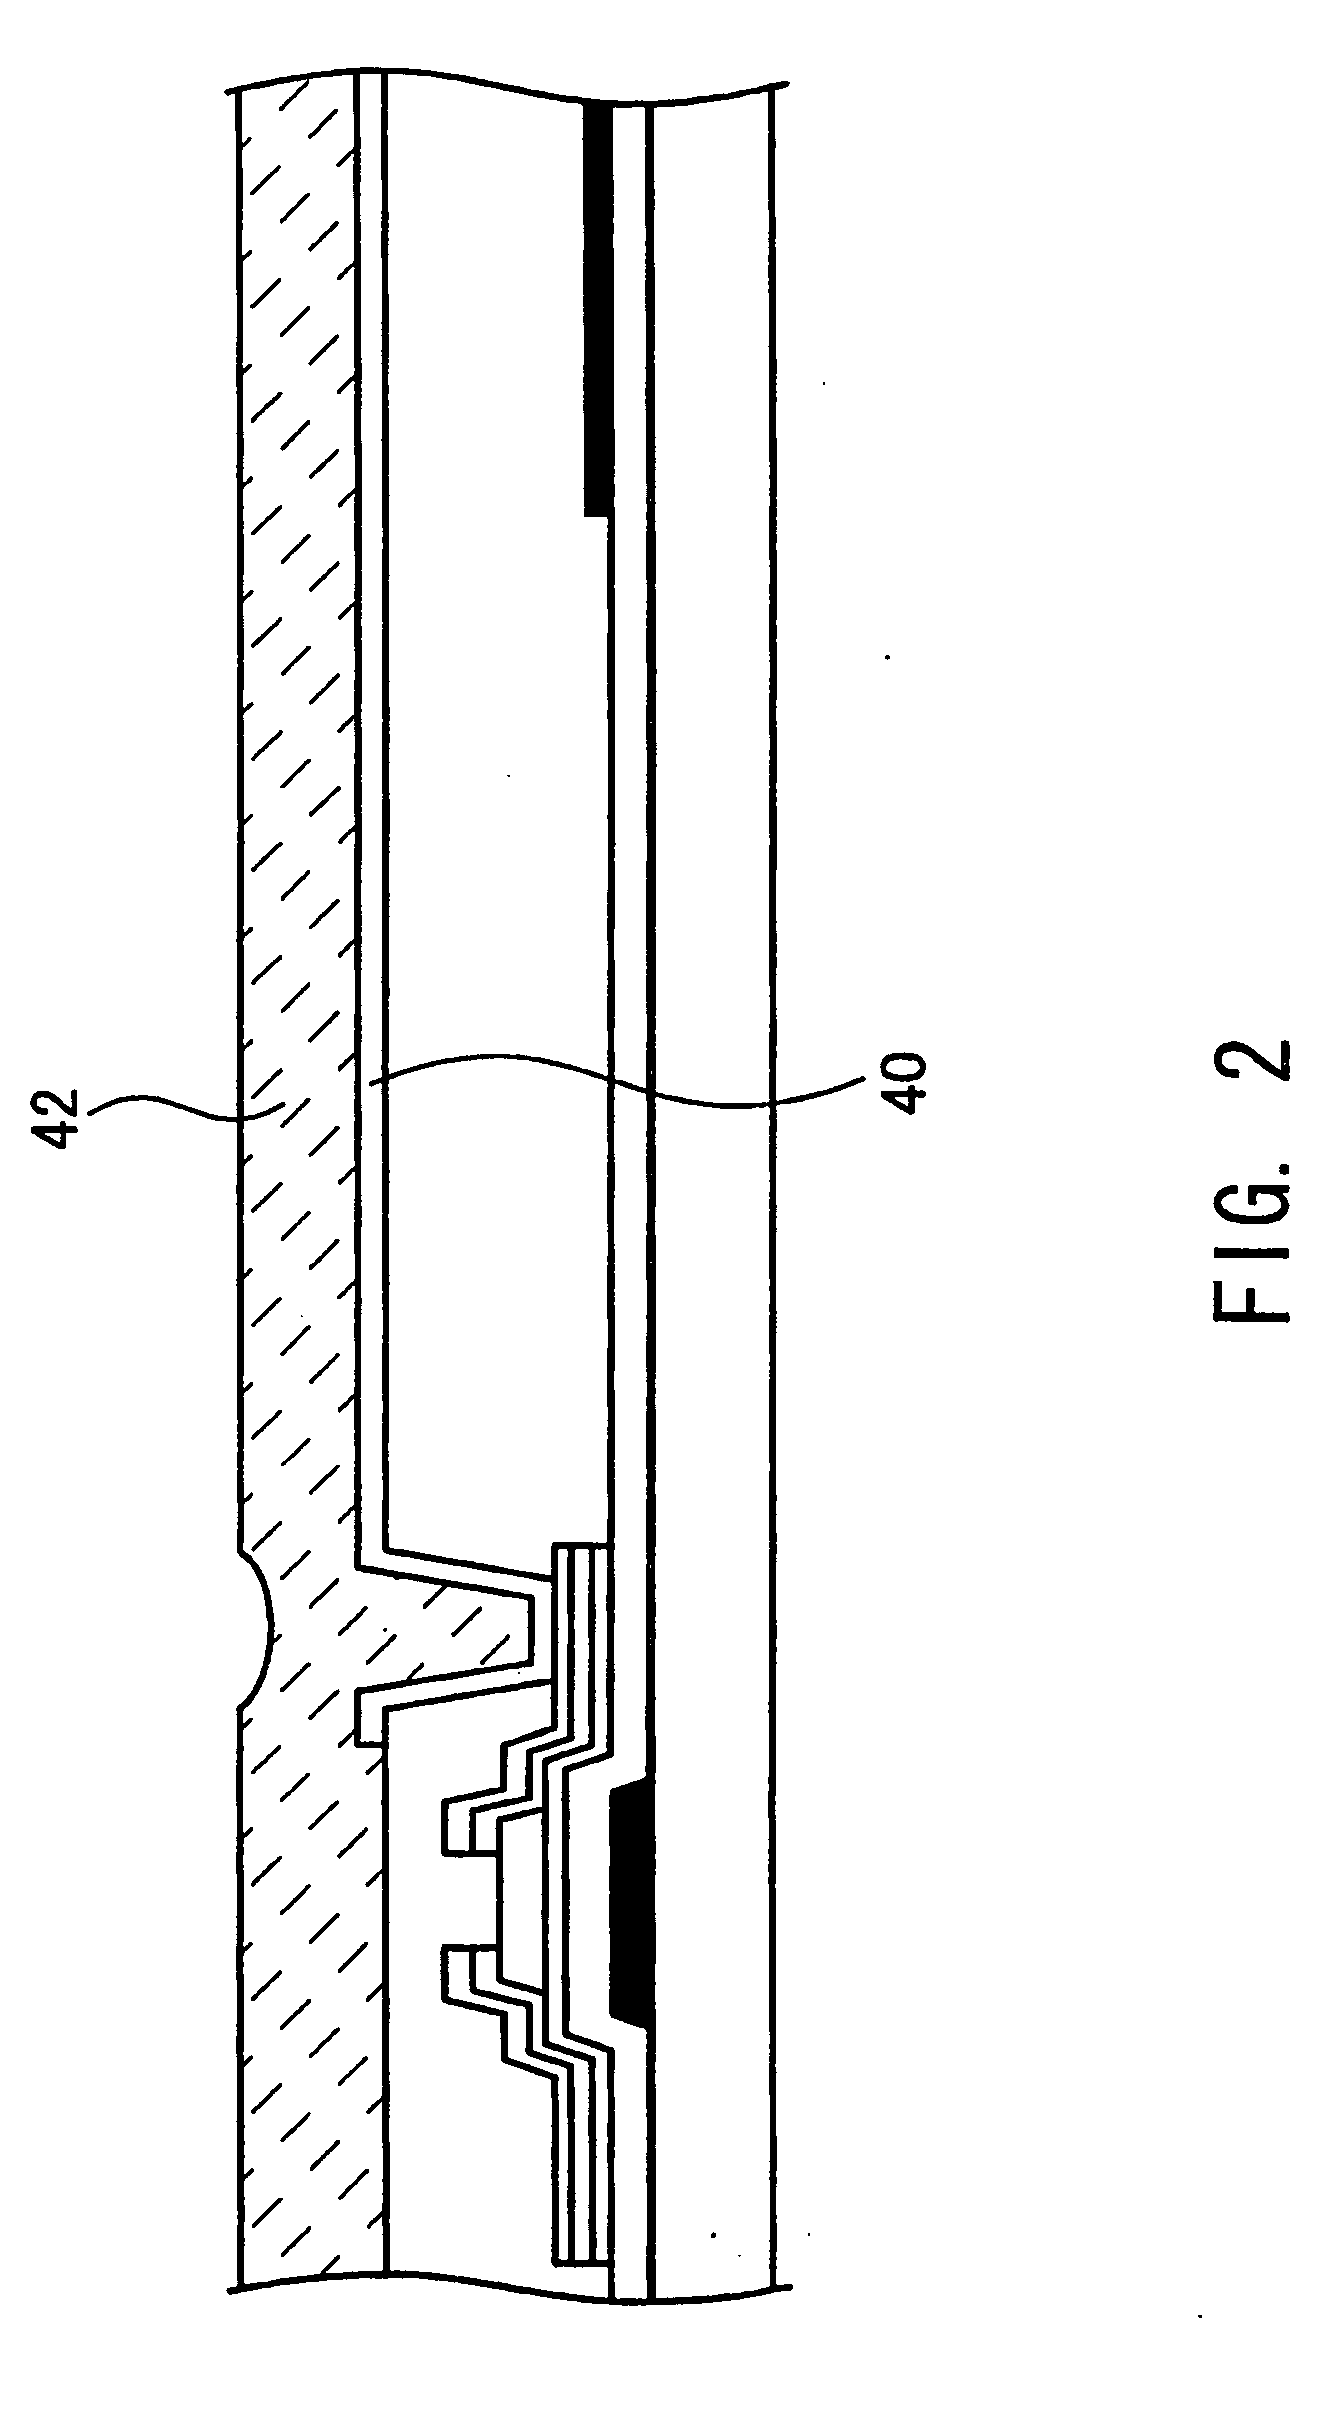 Liquid crystal panel and method of manufacturing the same